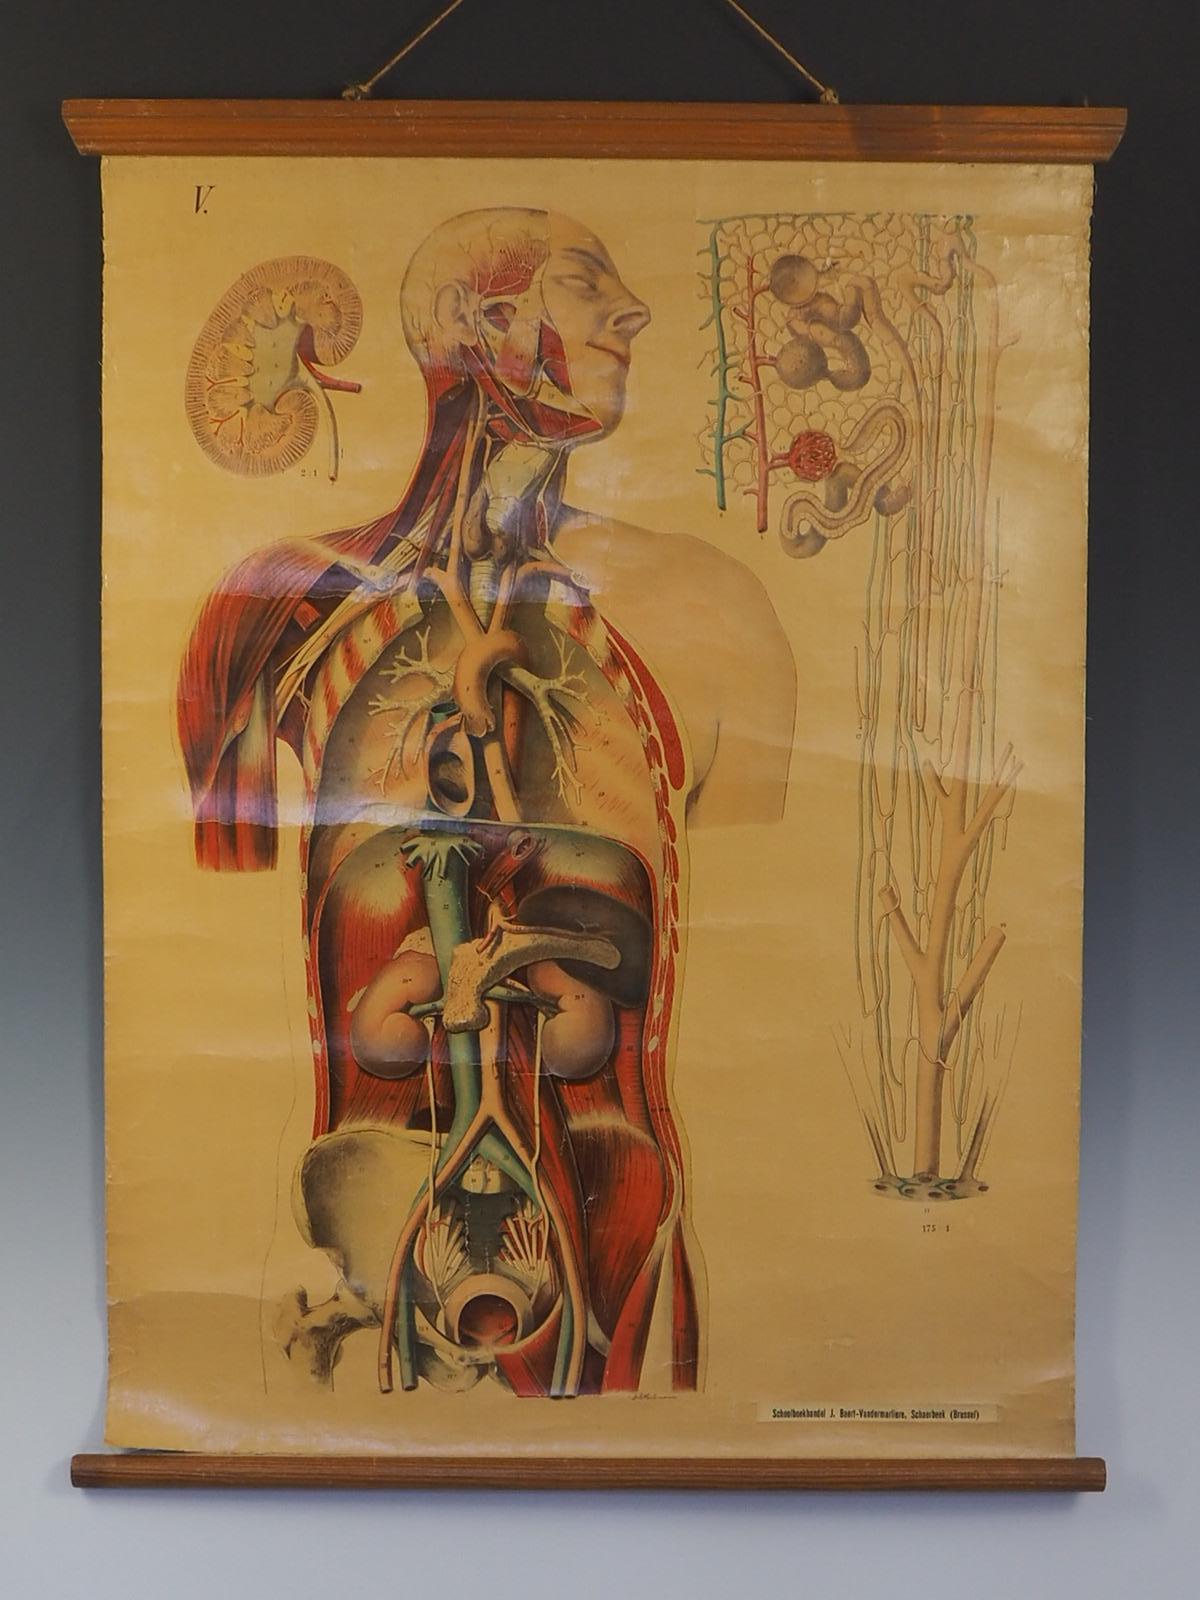 Description

Antique anatomical chart depicting the circulatory system

Chart number V. as part of the architecture of human anatomy designed and signed by E.Hoelemann ca.1908

Colour printed on paper with linen backing

Condition
Very good antique